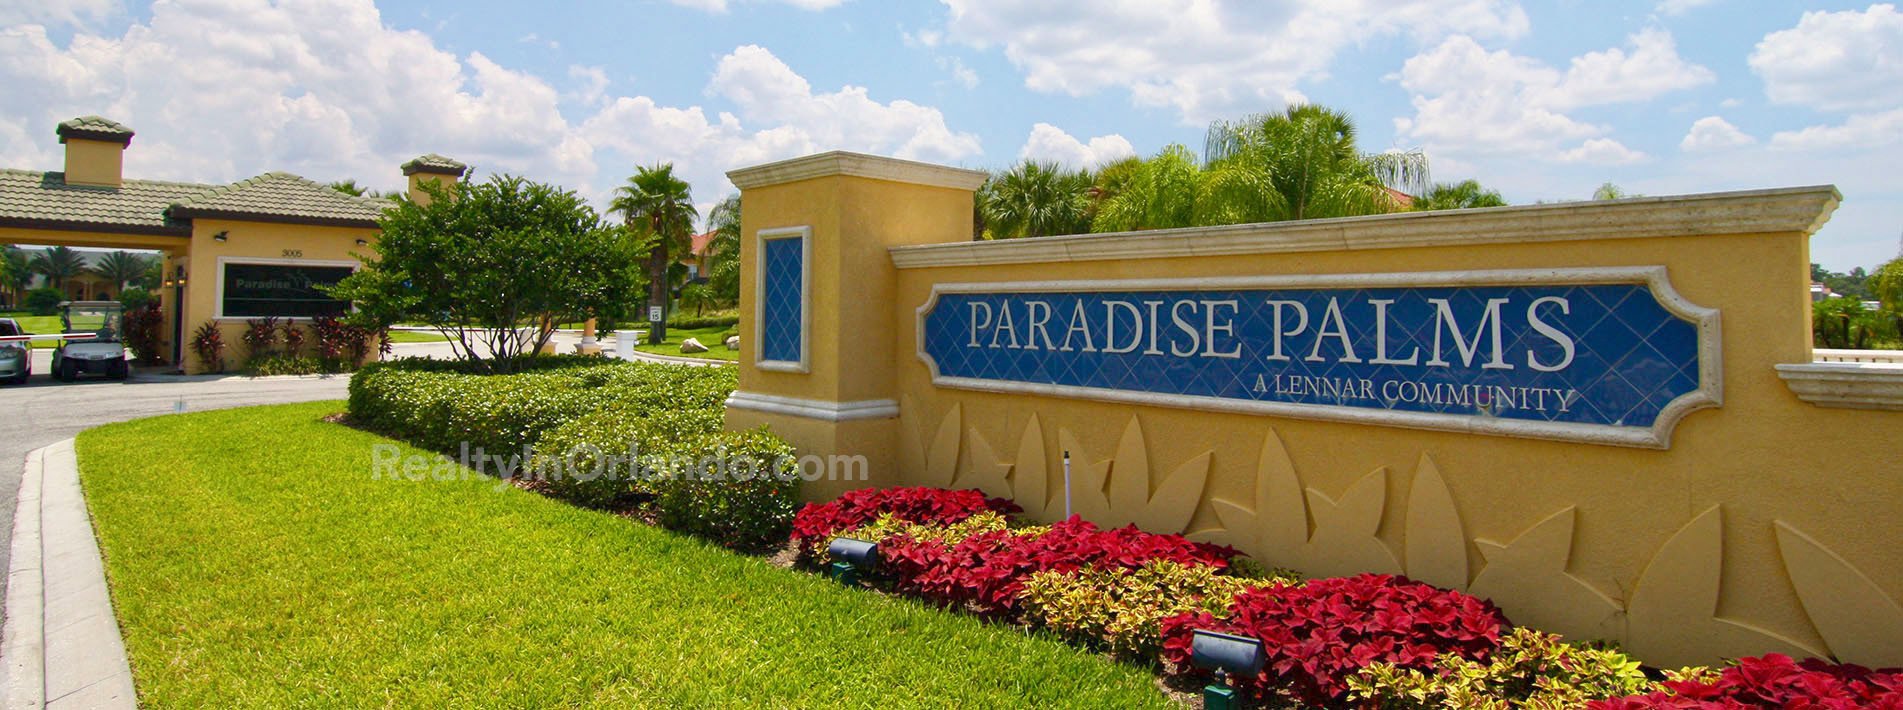 Paradise Palms Kissimmee Real Estate